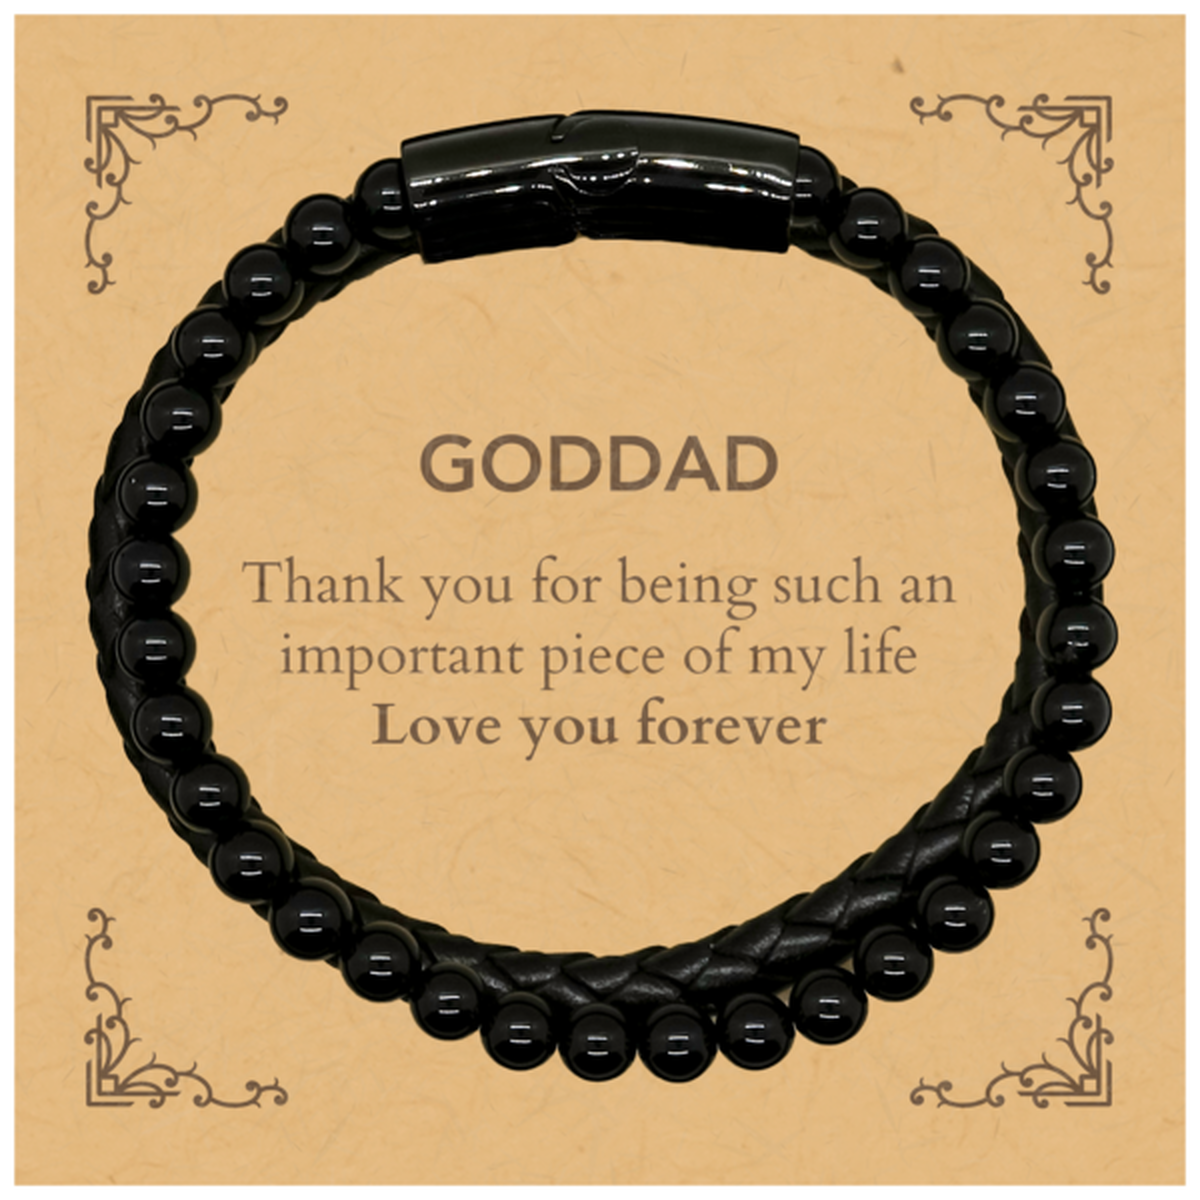 Appropriate Goddad Stone Leather Bracelets Epic Birthday Gifts for Goddad Thank you for being such an important piece of my life Goddad Christmas Mothers Fathers Day